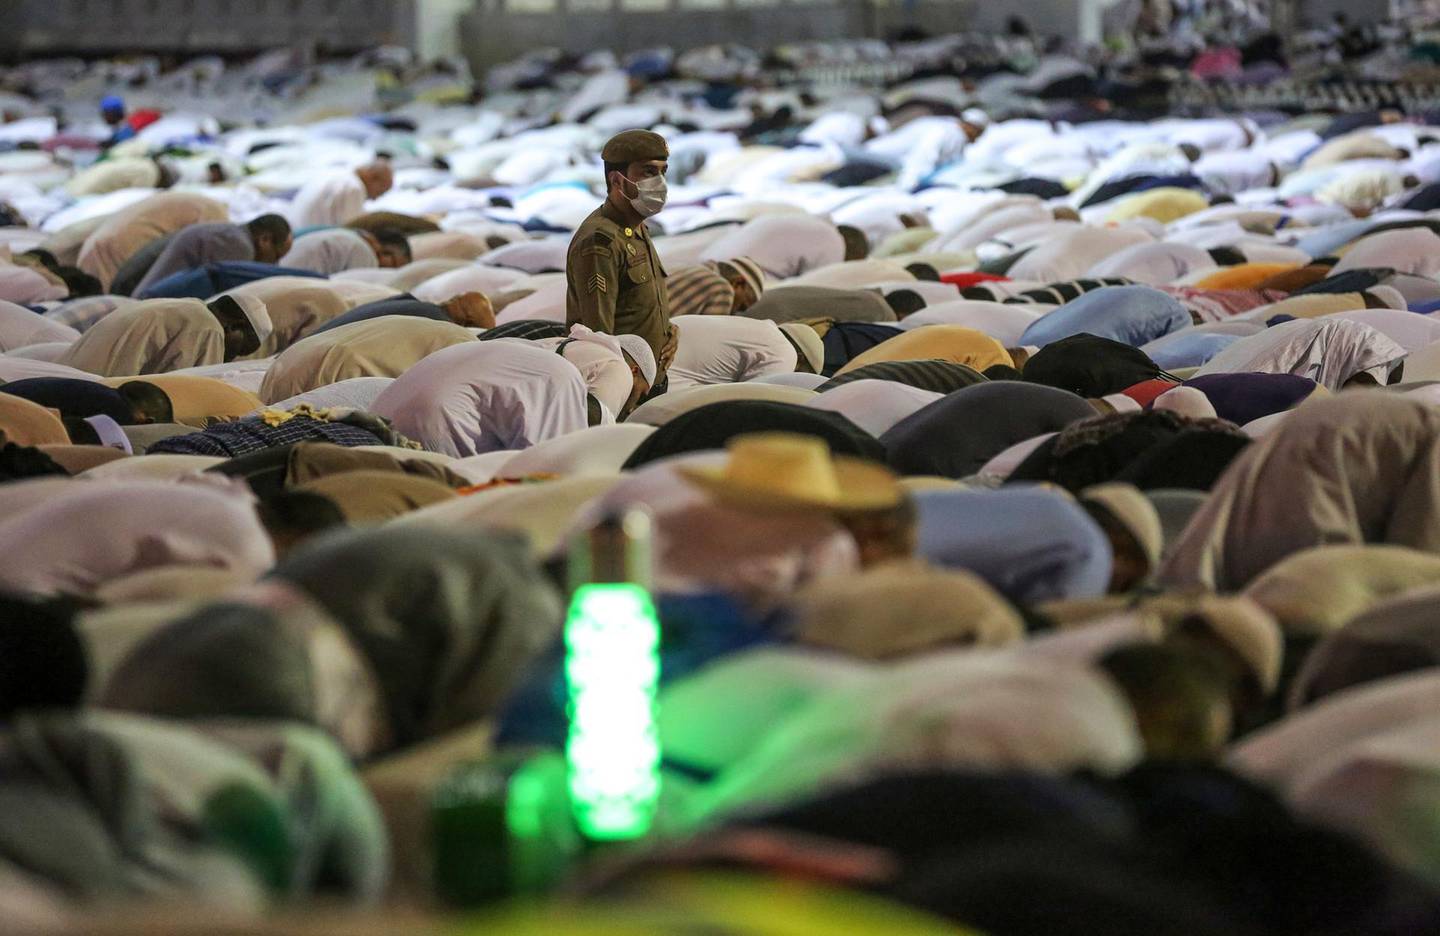 A Saudi security officer stands amongst Muslim worshippers as they perform prayers around the Kaaba, Islam's holiest shrine, at the Grand Mosque in Saudi Arabia's holy city of Mecca on August 17, 2018 prior to the start of the annual Hajj pilgrimage in the holy city. - Muslims from across the world are gathering in Mecca in Saudi Arabia for the annual hajj pilgrimage, one of the five pillars of Islam. (Photo by AHMAD AL-RUBAYE / AFP)